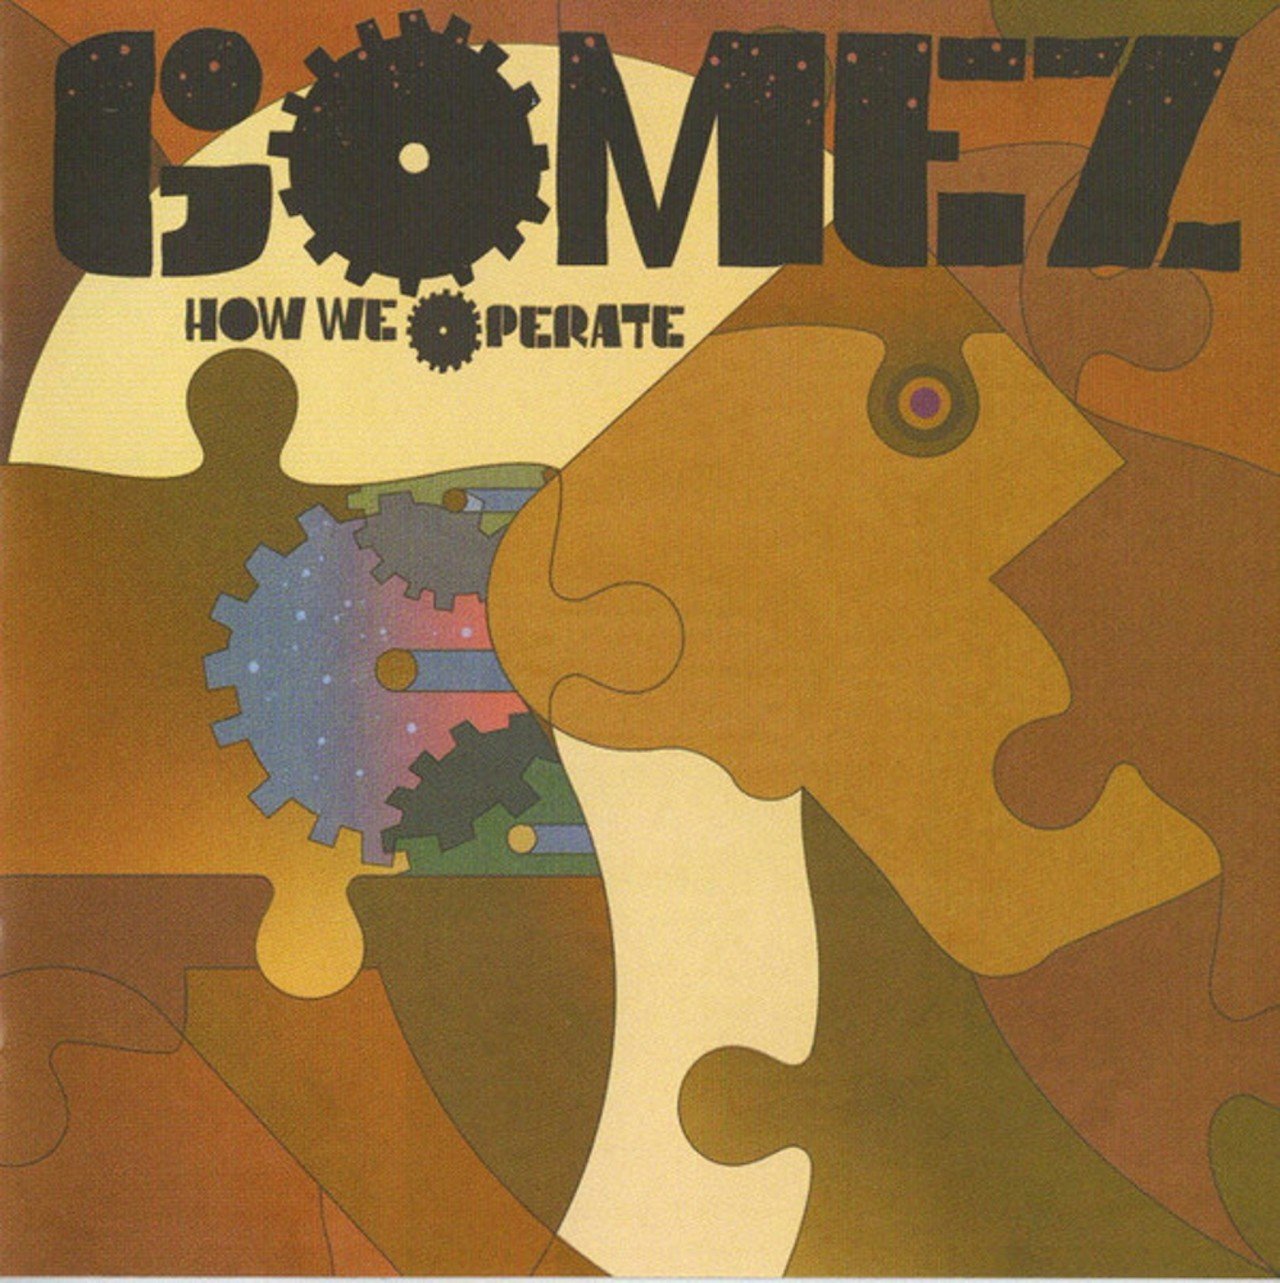  Gomez &#151; &#147;Charley Patton Songs&#148; 
&#147;I been lookin' in Detroit,
I been lookin' in Los Angeles,
I been lookin' in Louisville
I cannot find you&#148;